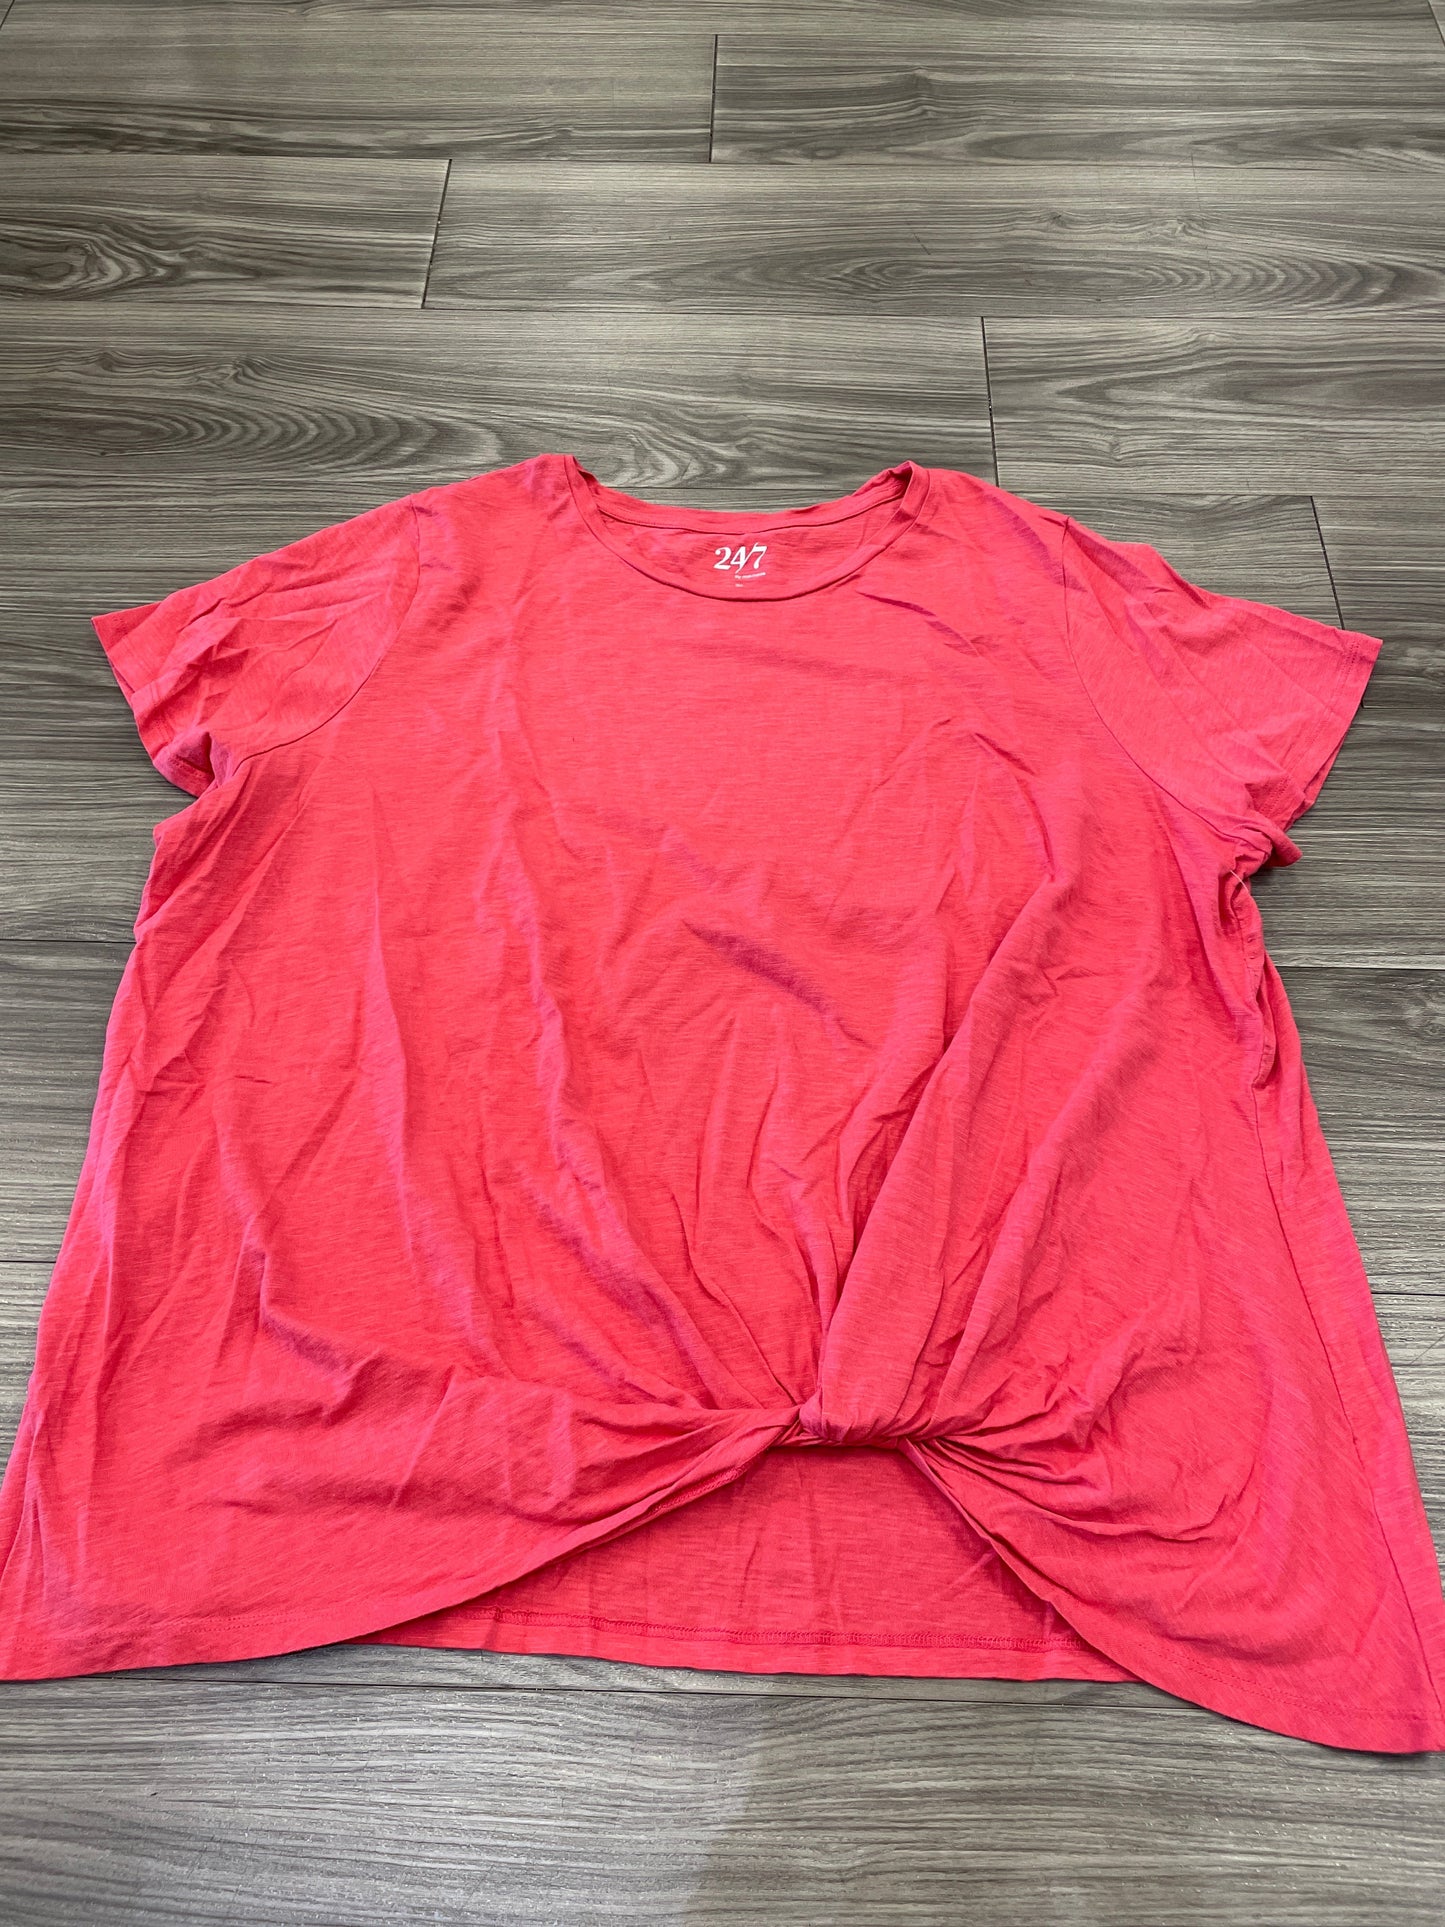 Red Top Short Sleeve Maurices, Size 3x